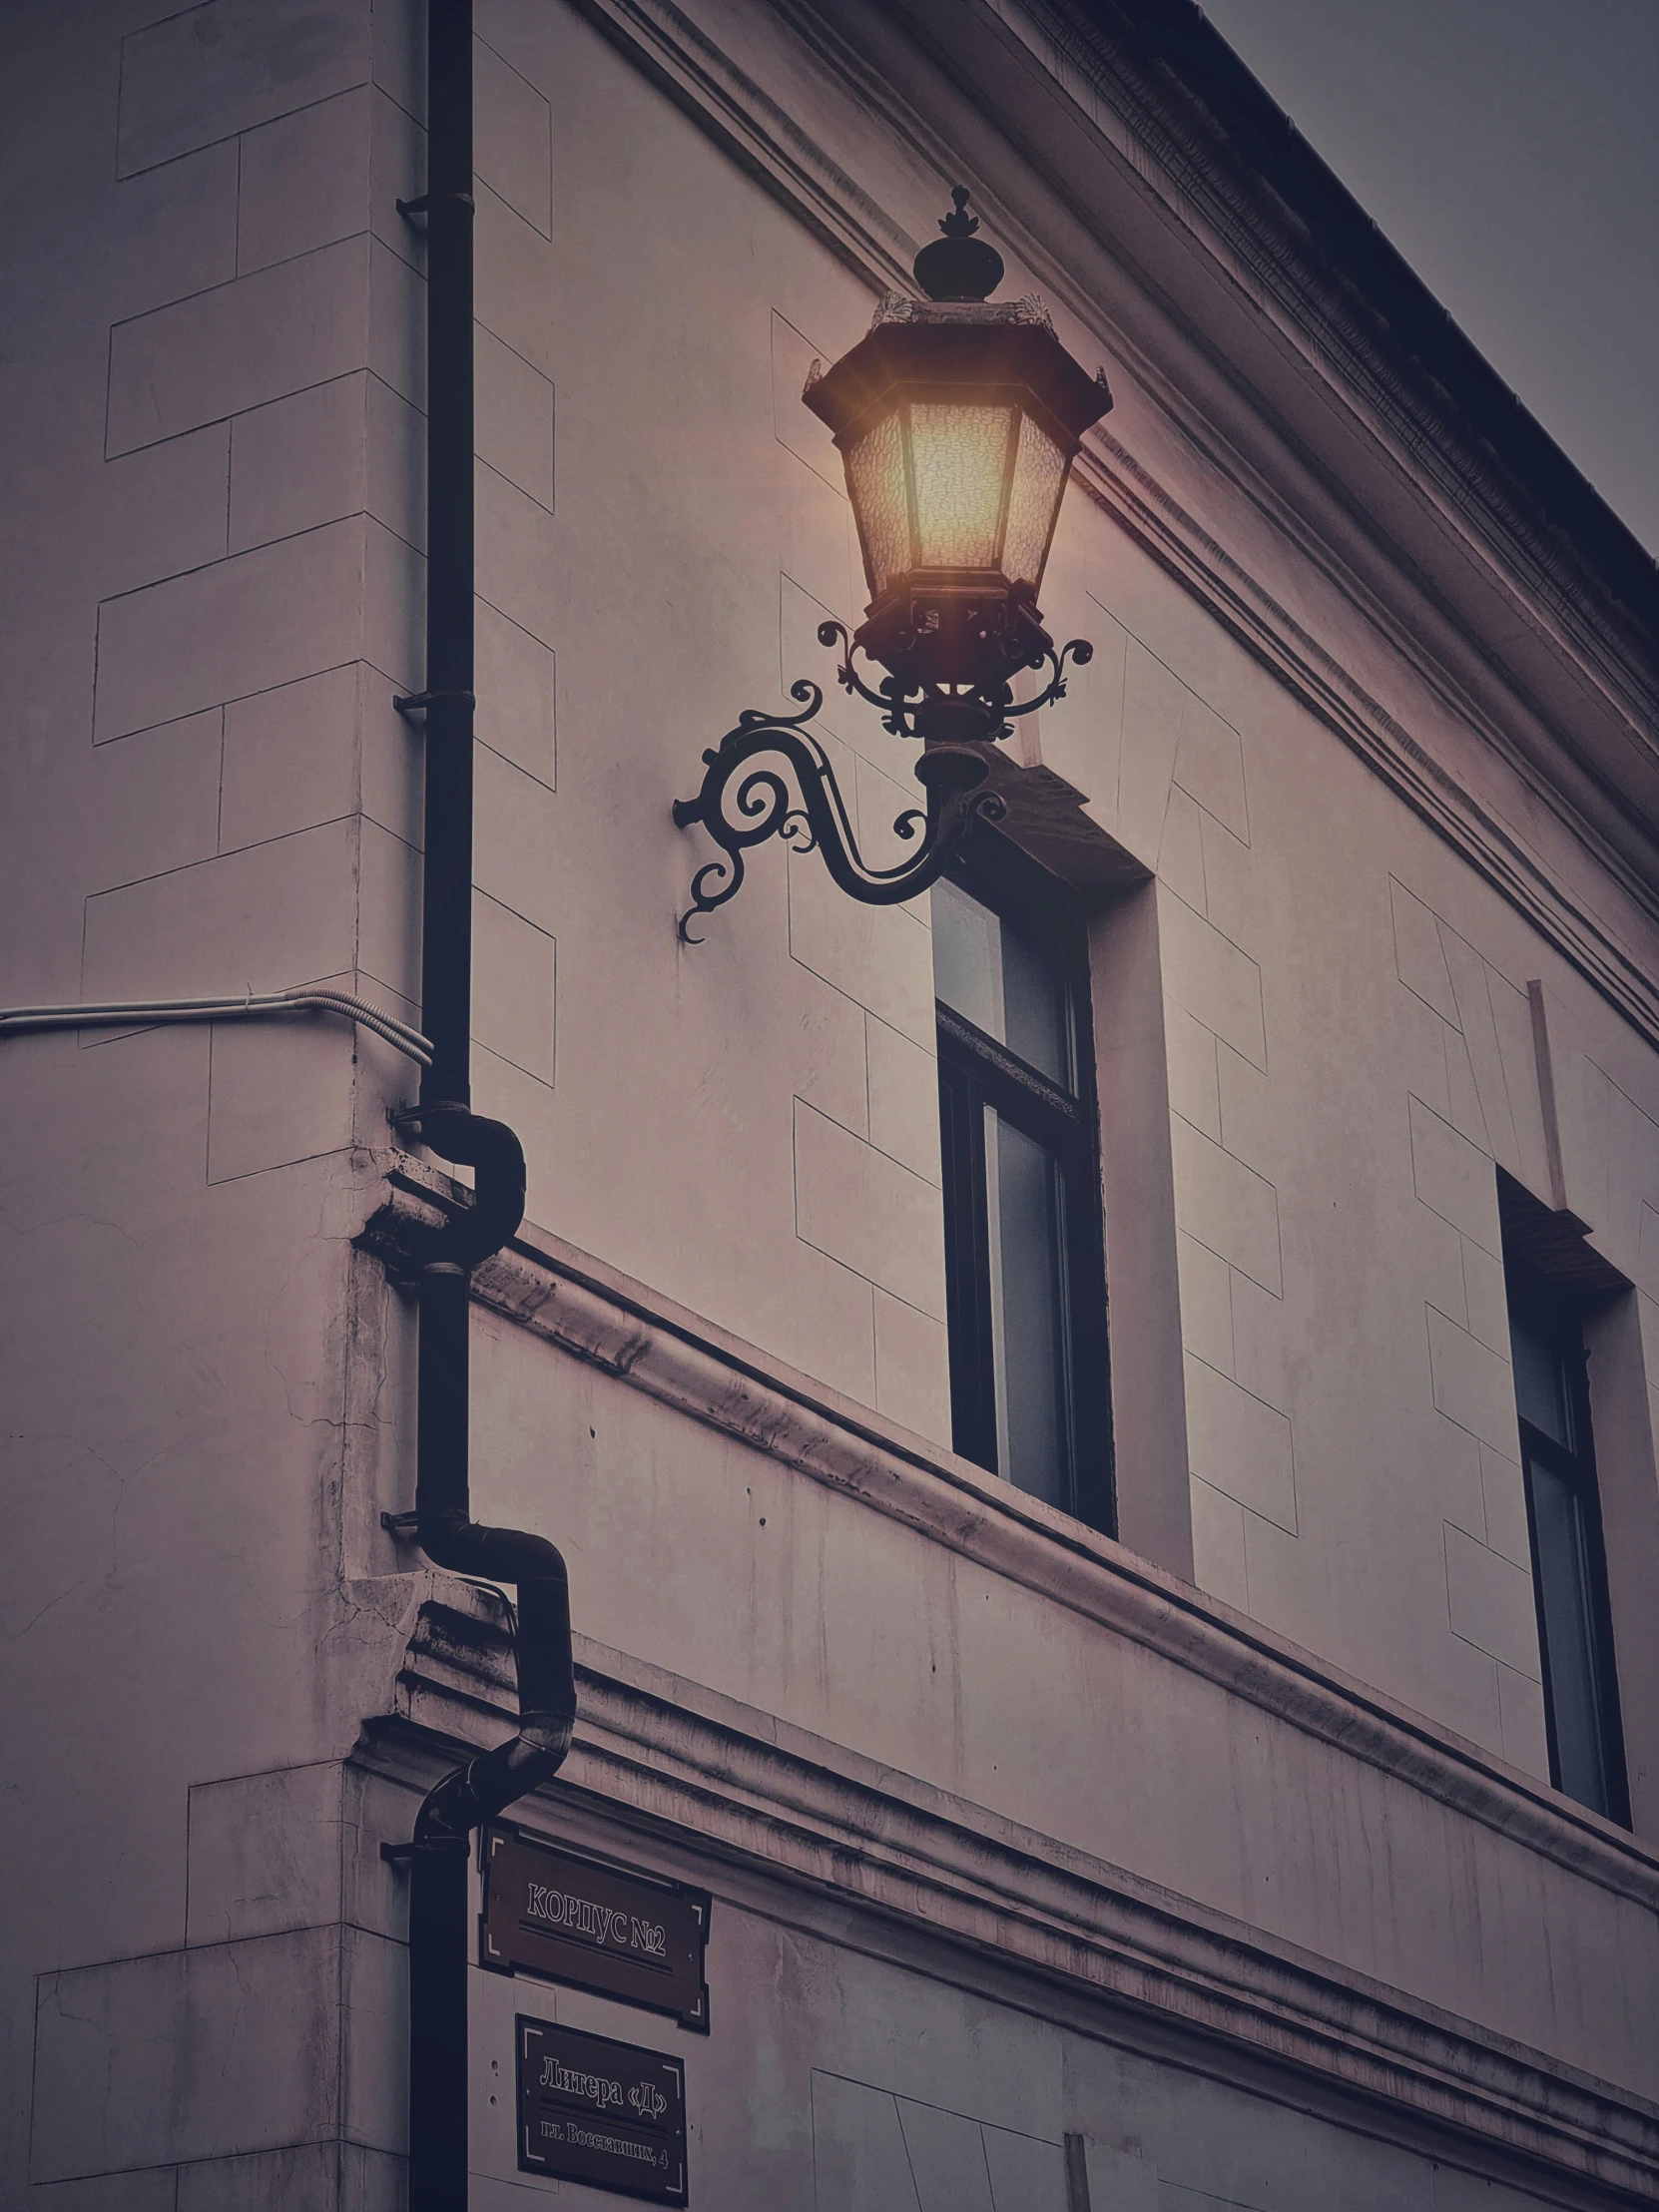 a lamp hanging from the side of a building next to a window